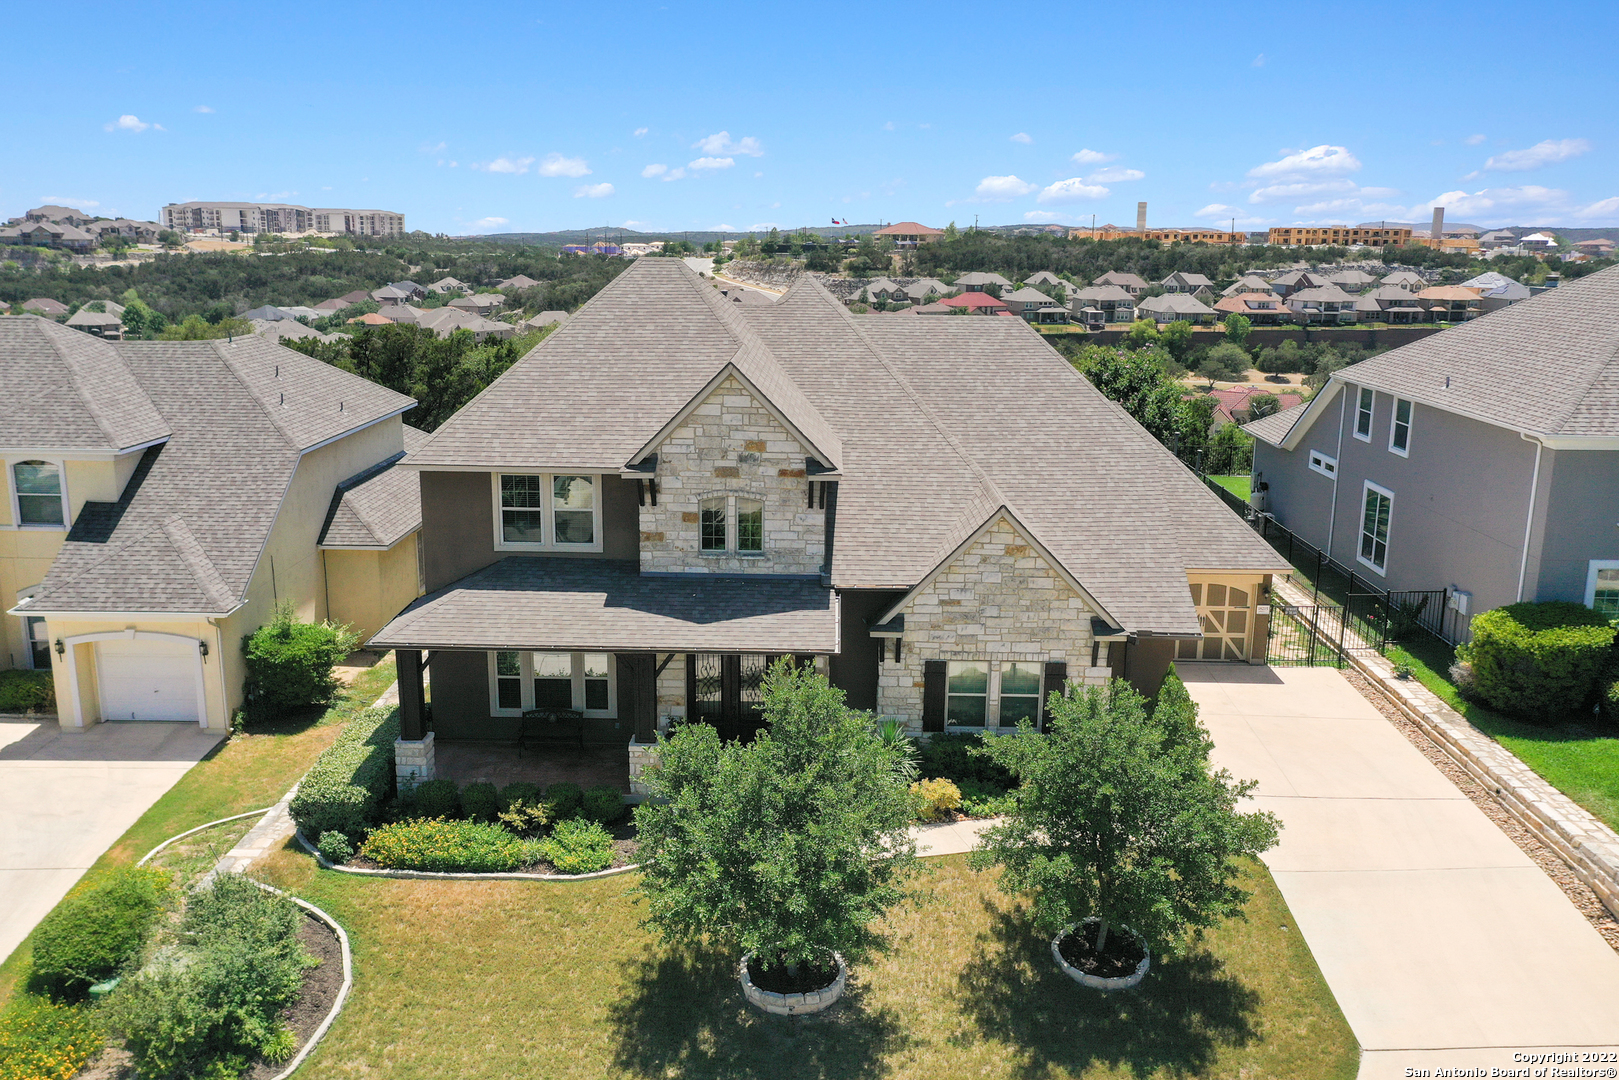 This magnificent property is situated on .25 acres and offers stunning interior finishes adding to the home's unique and sophisticated feel. You will have quick and easy access to 1-10 & loop 1604 with close proximity to La Cantera, The Rim, UTSA, USAA, Medical Center, and multiple upscale golf courses! Upon arrival, gorgeous curb appeal is evident through the meticulously maintained lawn, delicate landscaping, light stone with contrasting stucco, and stylish structure. Inside, a grand foyer greets you with soaring ceilings and views of the detailed wrought iron staircases. Rich hardwood floors guide guests to the formal living space with an ornate chandelier and natural lighting. In the common areas, picture windows are highlighted by stone accents, a spacious living room with surround sound, and a warm fireplace. The household gourmet chef will revel in the top-of-the-line GE Monogram appliances, including the GE Elite Pro water filtration system. Stylish yet functional selections include all-white cabinetry, complementing counters, a stylish backsplash, a custom granite island with bar seating, and an eat-in kitchen. Dedicated office space is also located on the main leave with French doors for privacy. Retreat to the luxurious-sized primary offering tray ceilings, bay windows, and room for a seating area. The en suite offers granite counters, a spa-like soaking tub, a roomy walk-in shower, and travertine tile. A generous game room can be found upstairs for additional entertainment. The media room is also pre-wired for surround sound. Outside, a stained patio with a built-in kitchen also features GE monogram appliances. There's plenty of room to build the pool of your dreams. In addition to all this home has to offer, plenty of green features including attic insulation, double pane windows, enhanced air filtration, and much more. Peace and tranquility are evident with views of the greenbelt and Texas sunsets. **Pool table and living room TV convey with the property**